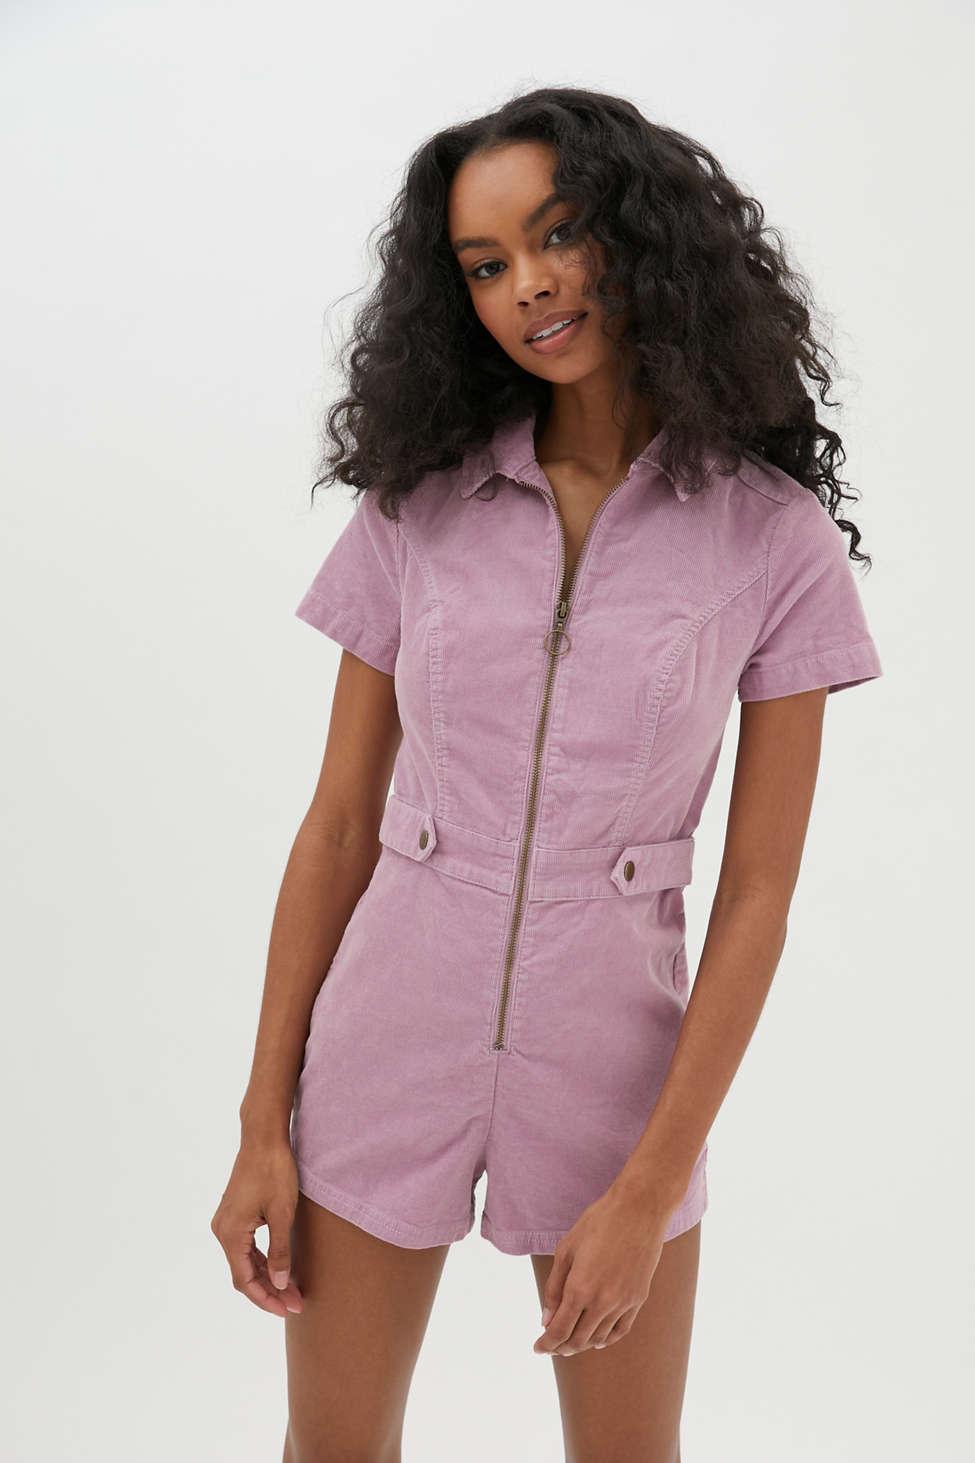 https://cdna.lystit.com/photos/urbanoutfitters/c5175a4f/urban-outfitters-designer-Lilac-Uo-Tyson-Zip-front-Short-Sleeve-Romper.jpeg